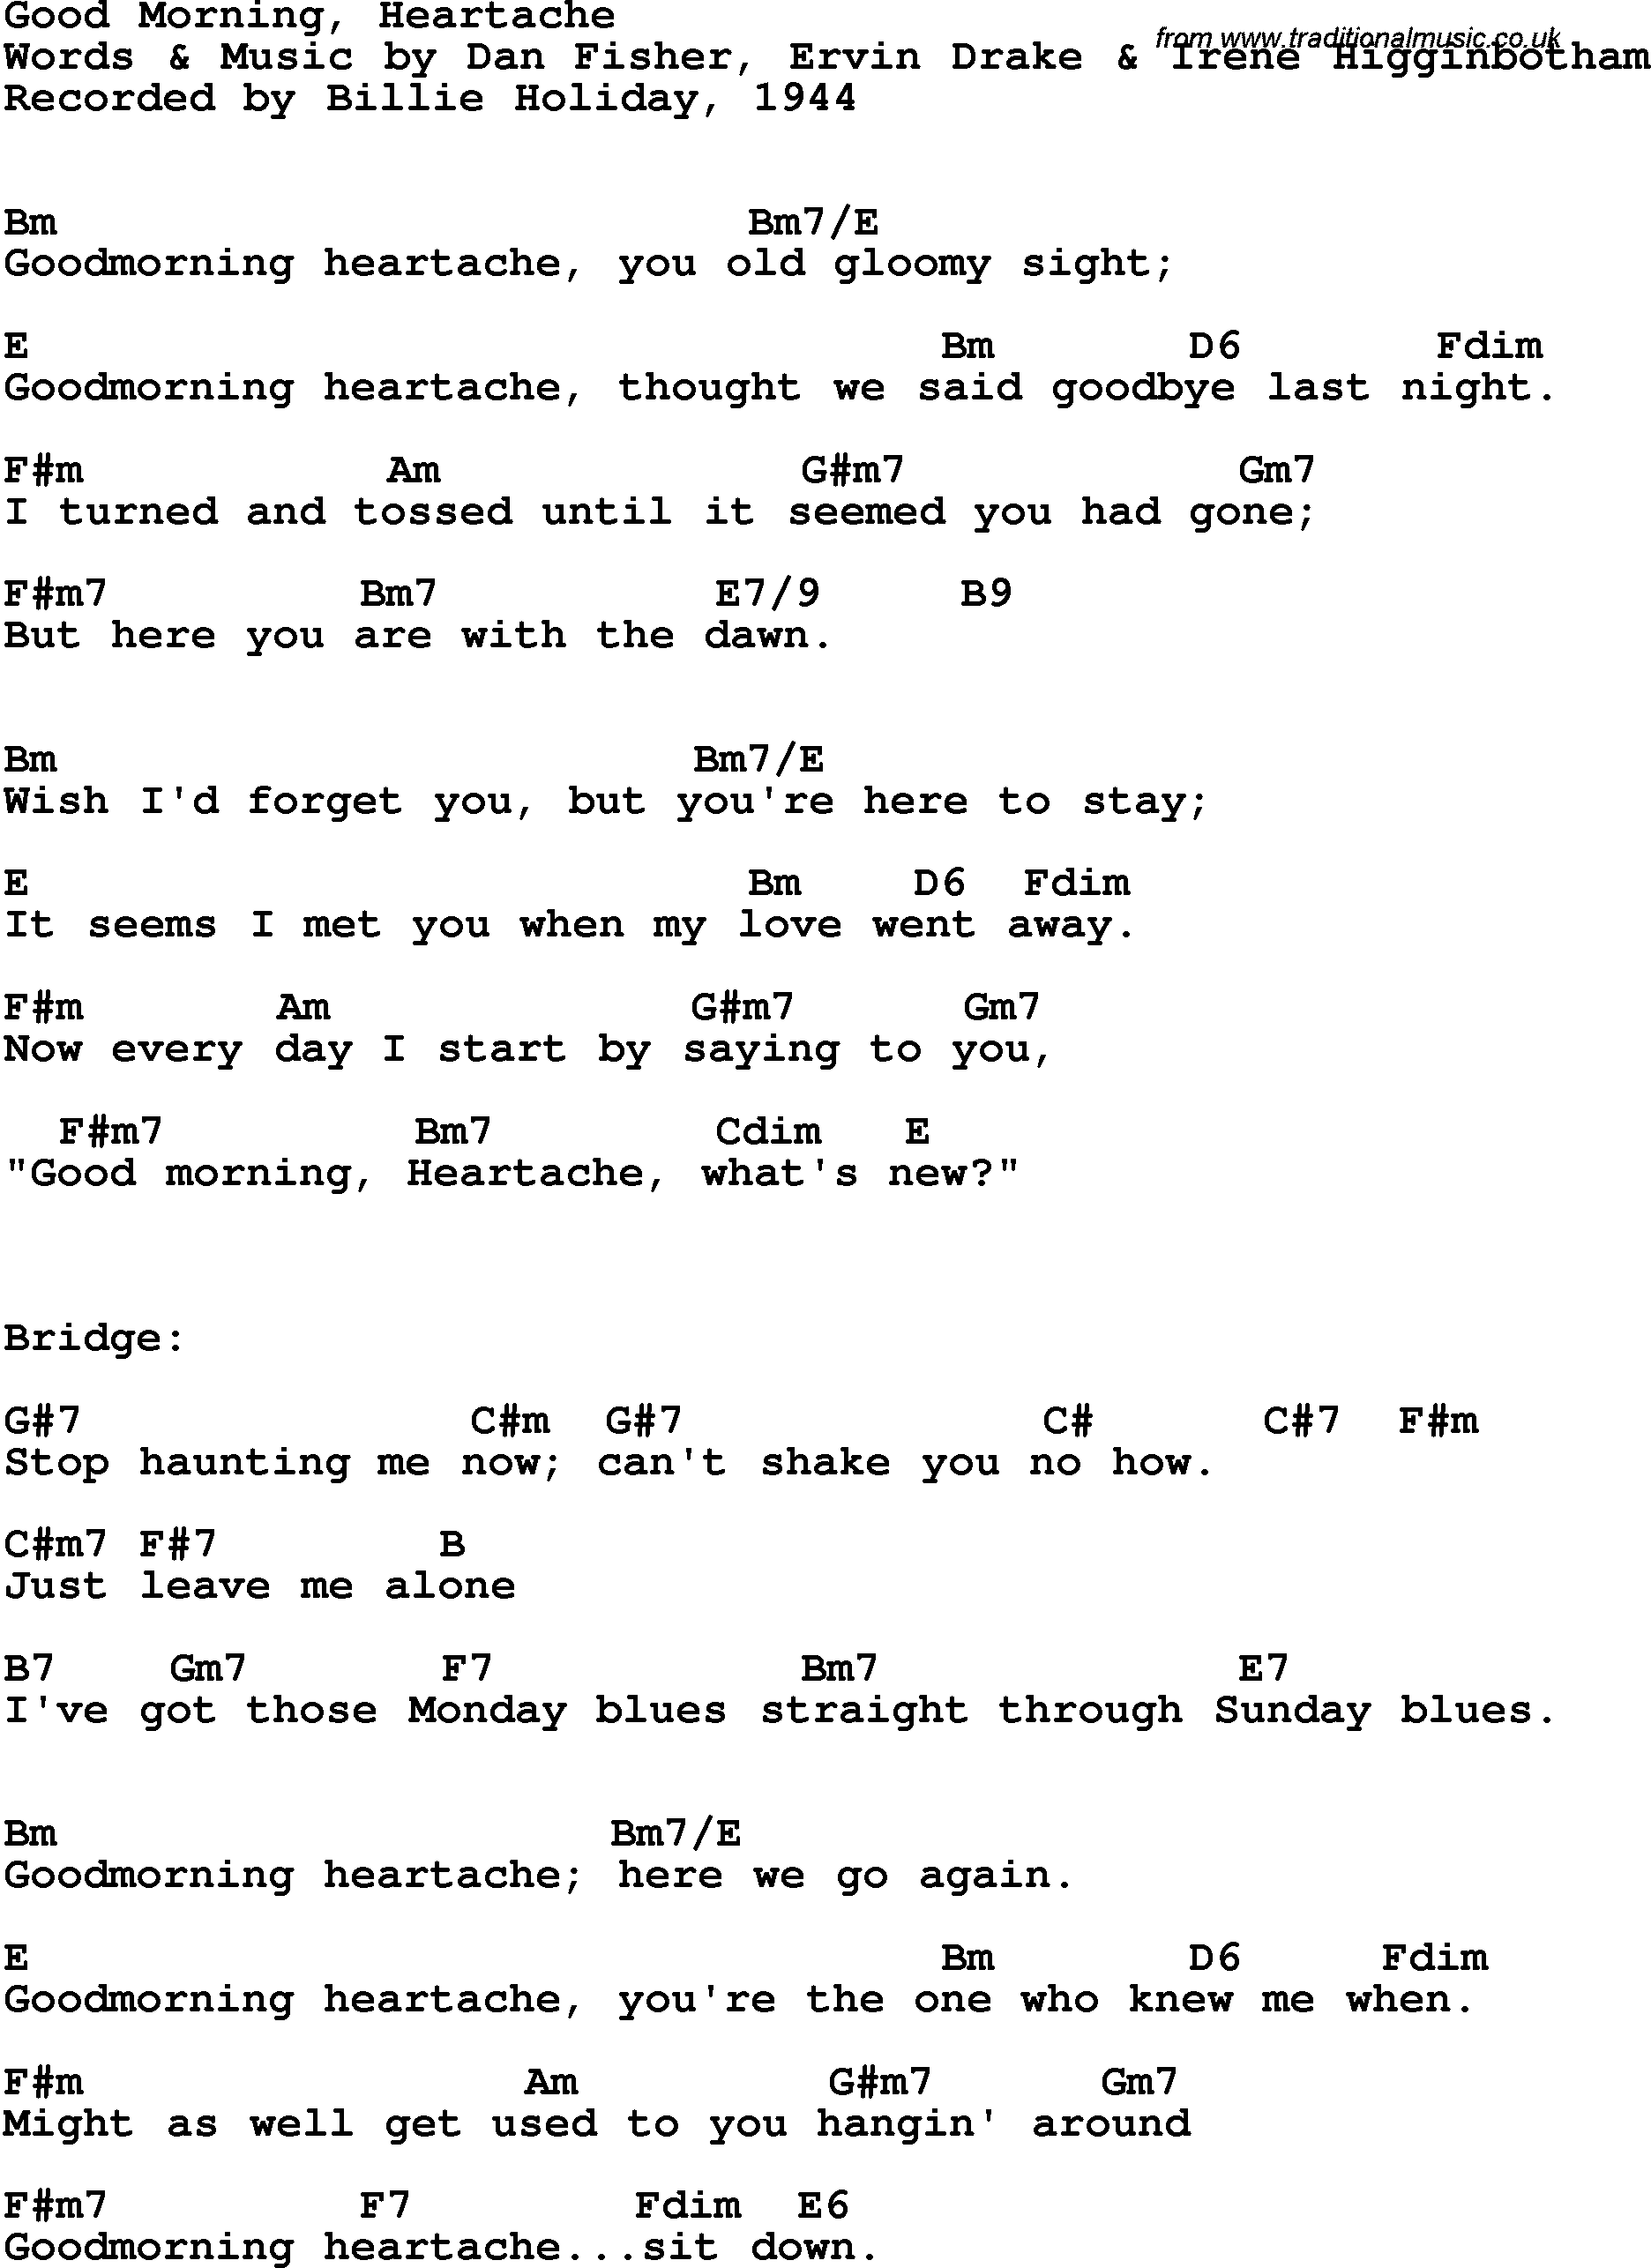 Song Lyrics with guitar chords for Good Morning Heartache - Billie Holiday, 1944